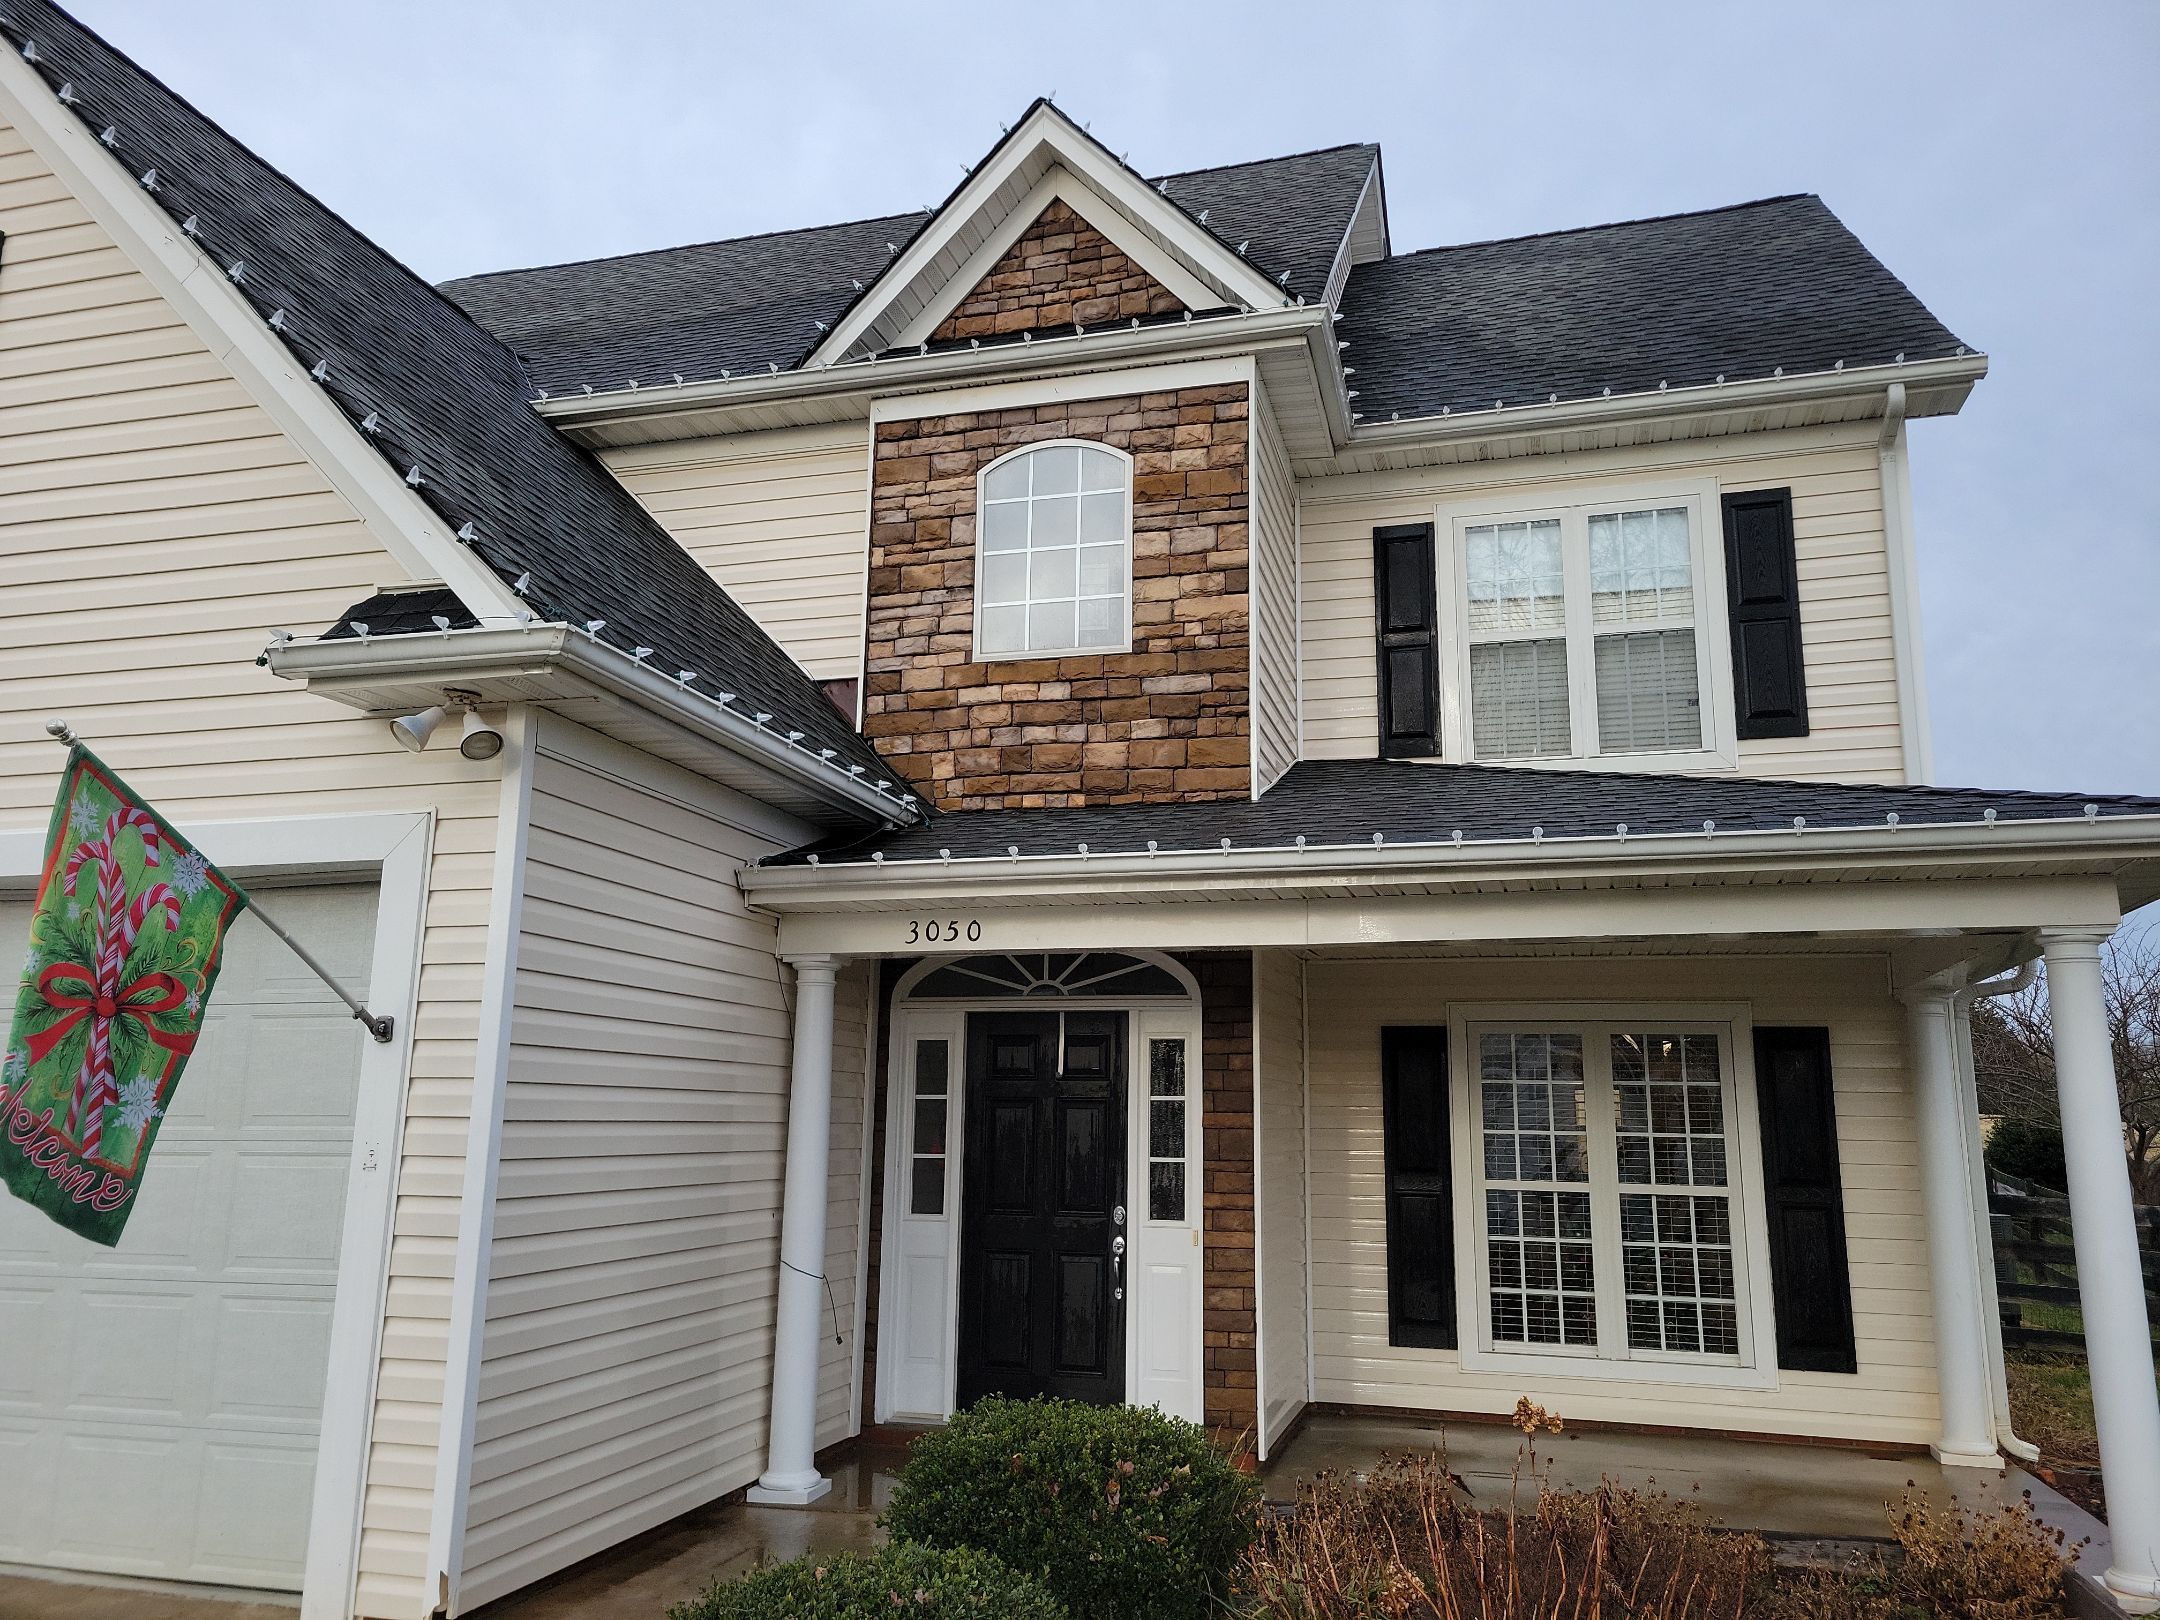 House Washing and Concrete Pressure Washing in Charlottesville, VA